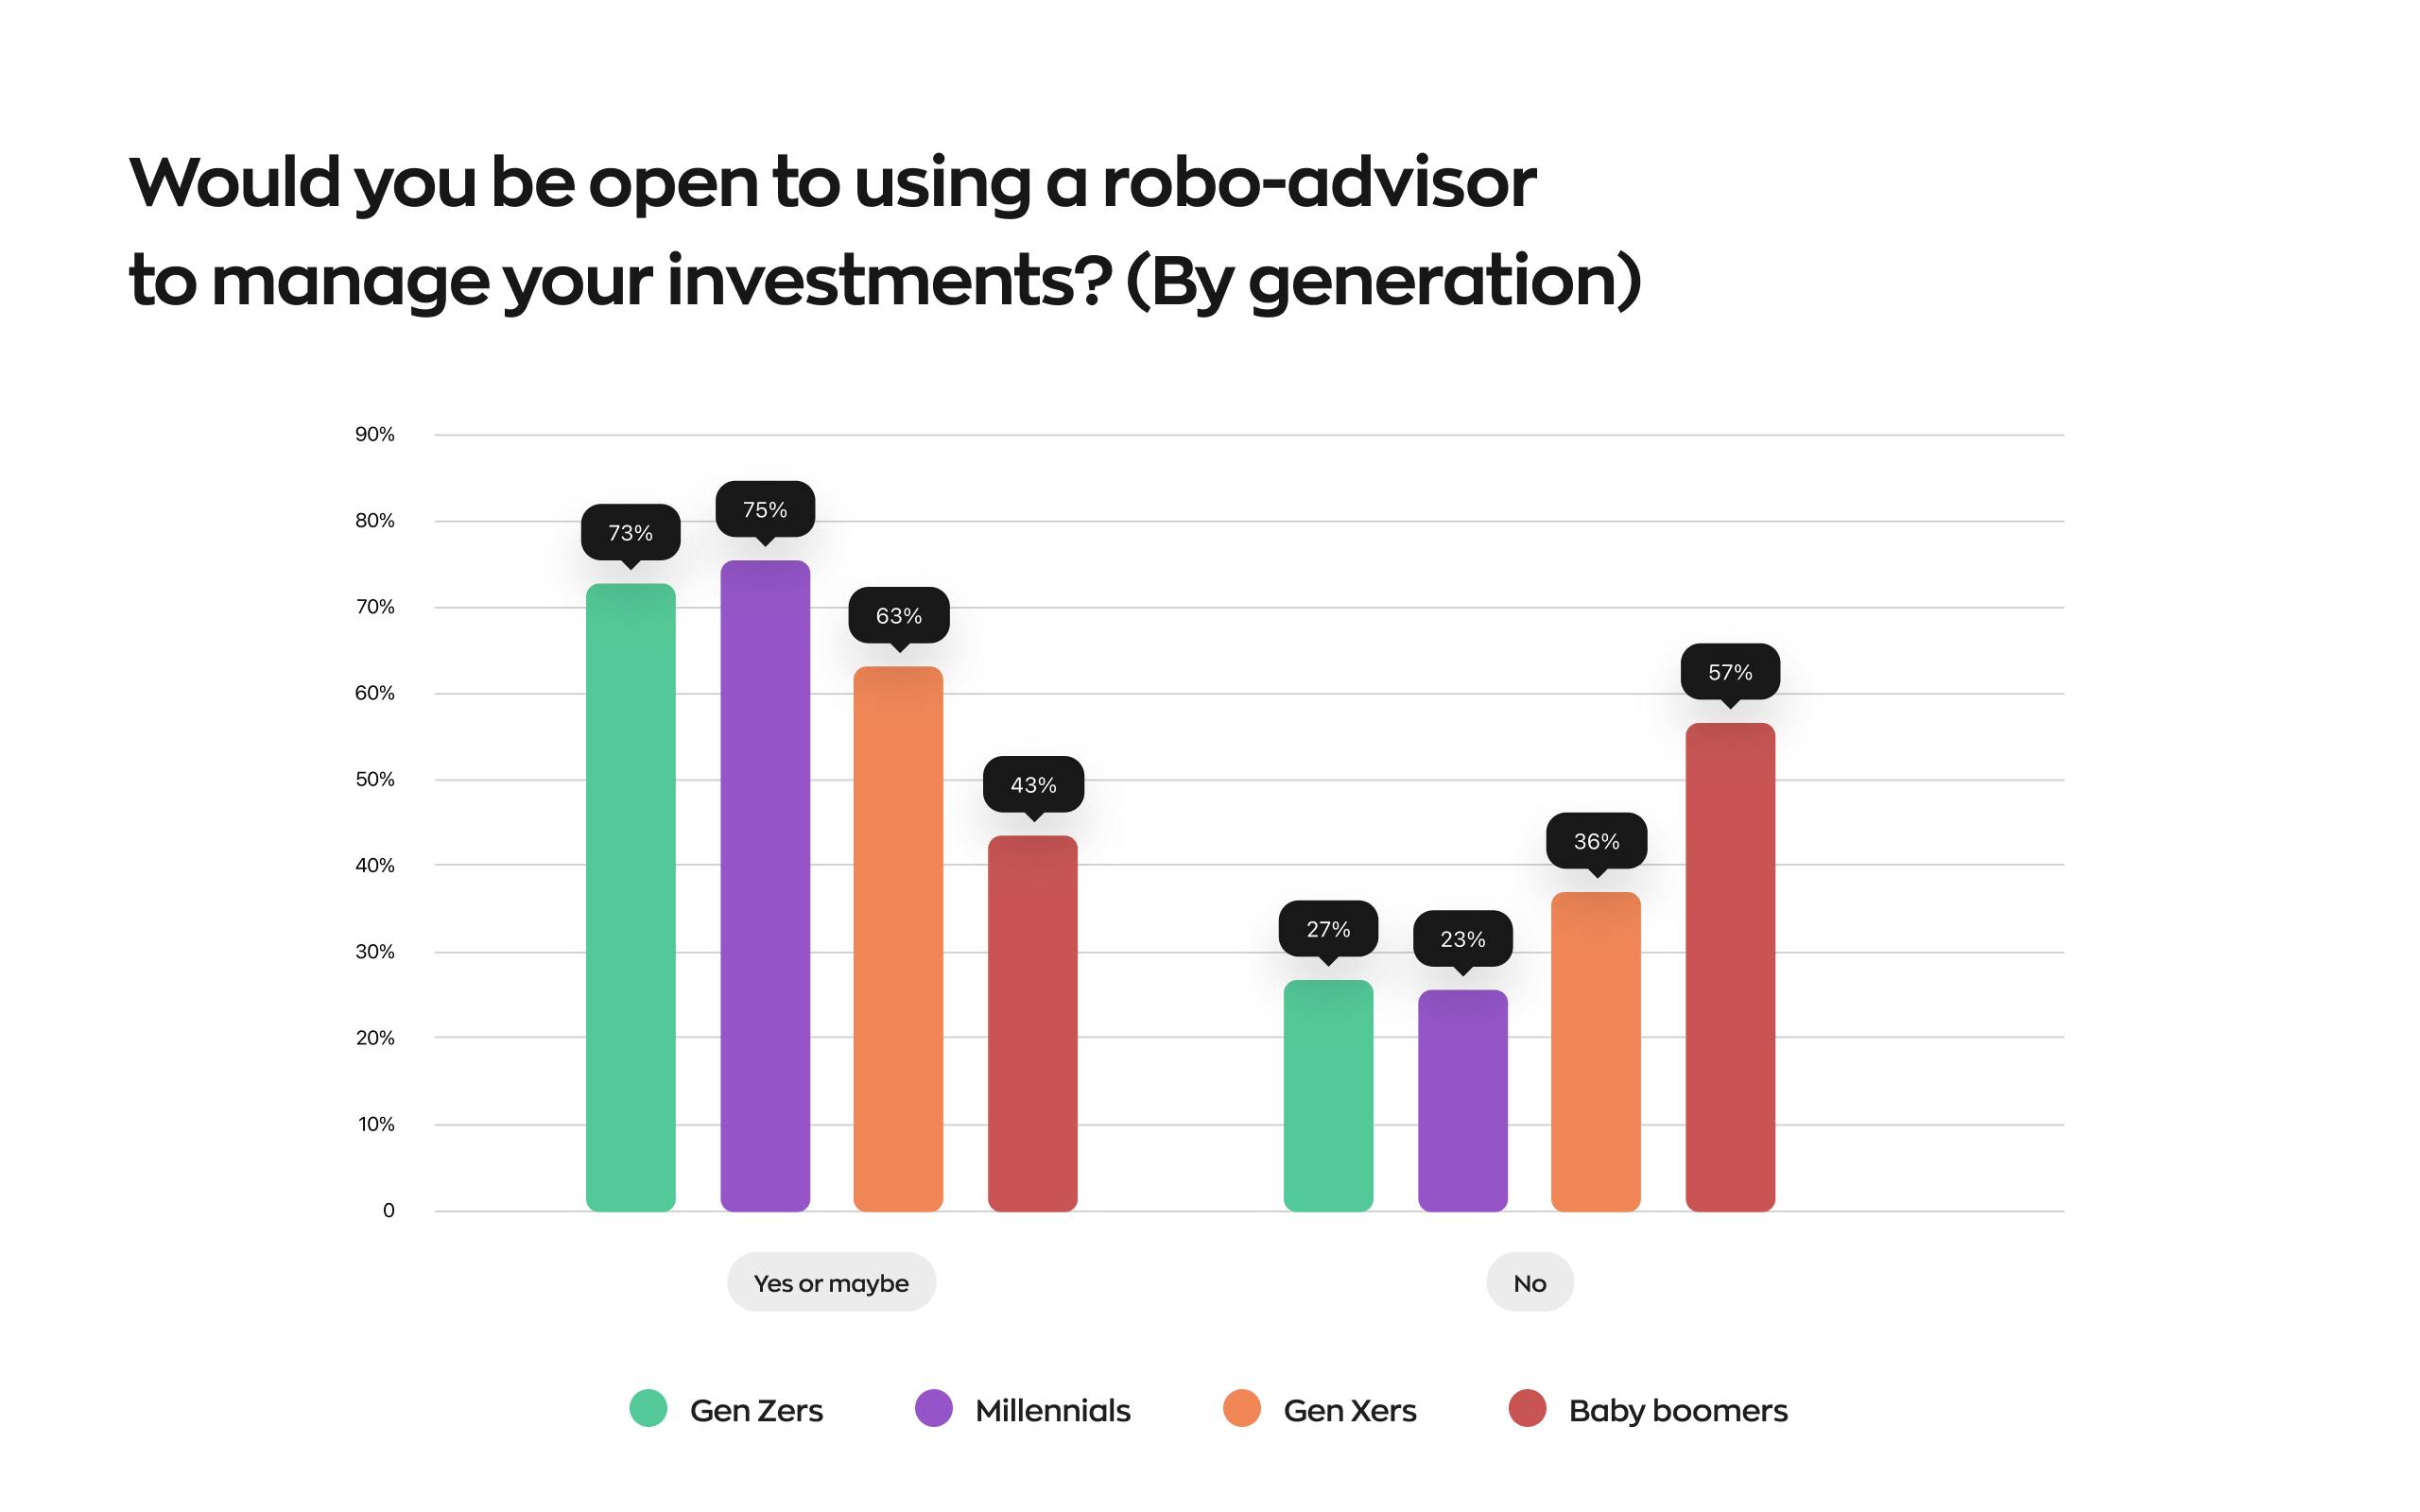 Would you be open to using a Robo-advisor to manage your investment? Survey for people from different generations.